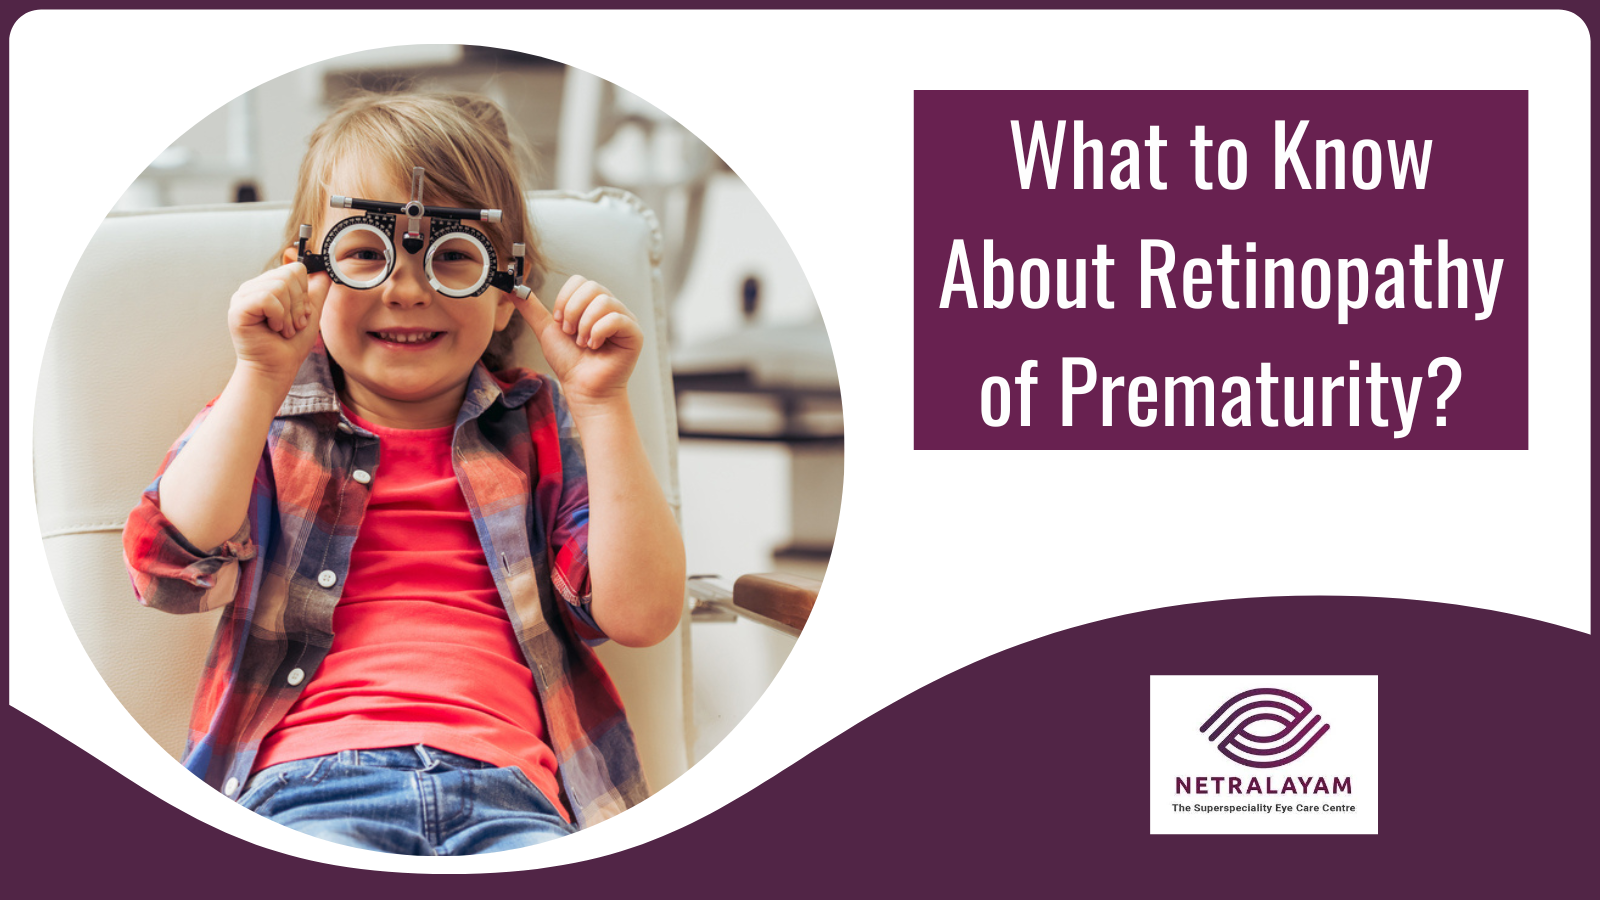 What to Know About Retinopathy of Prematurity?